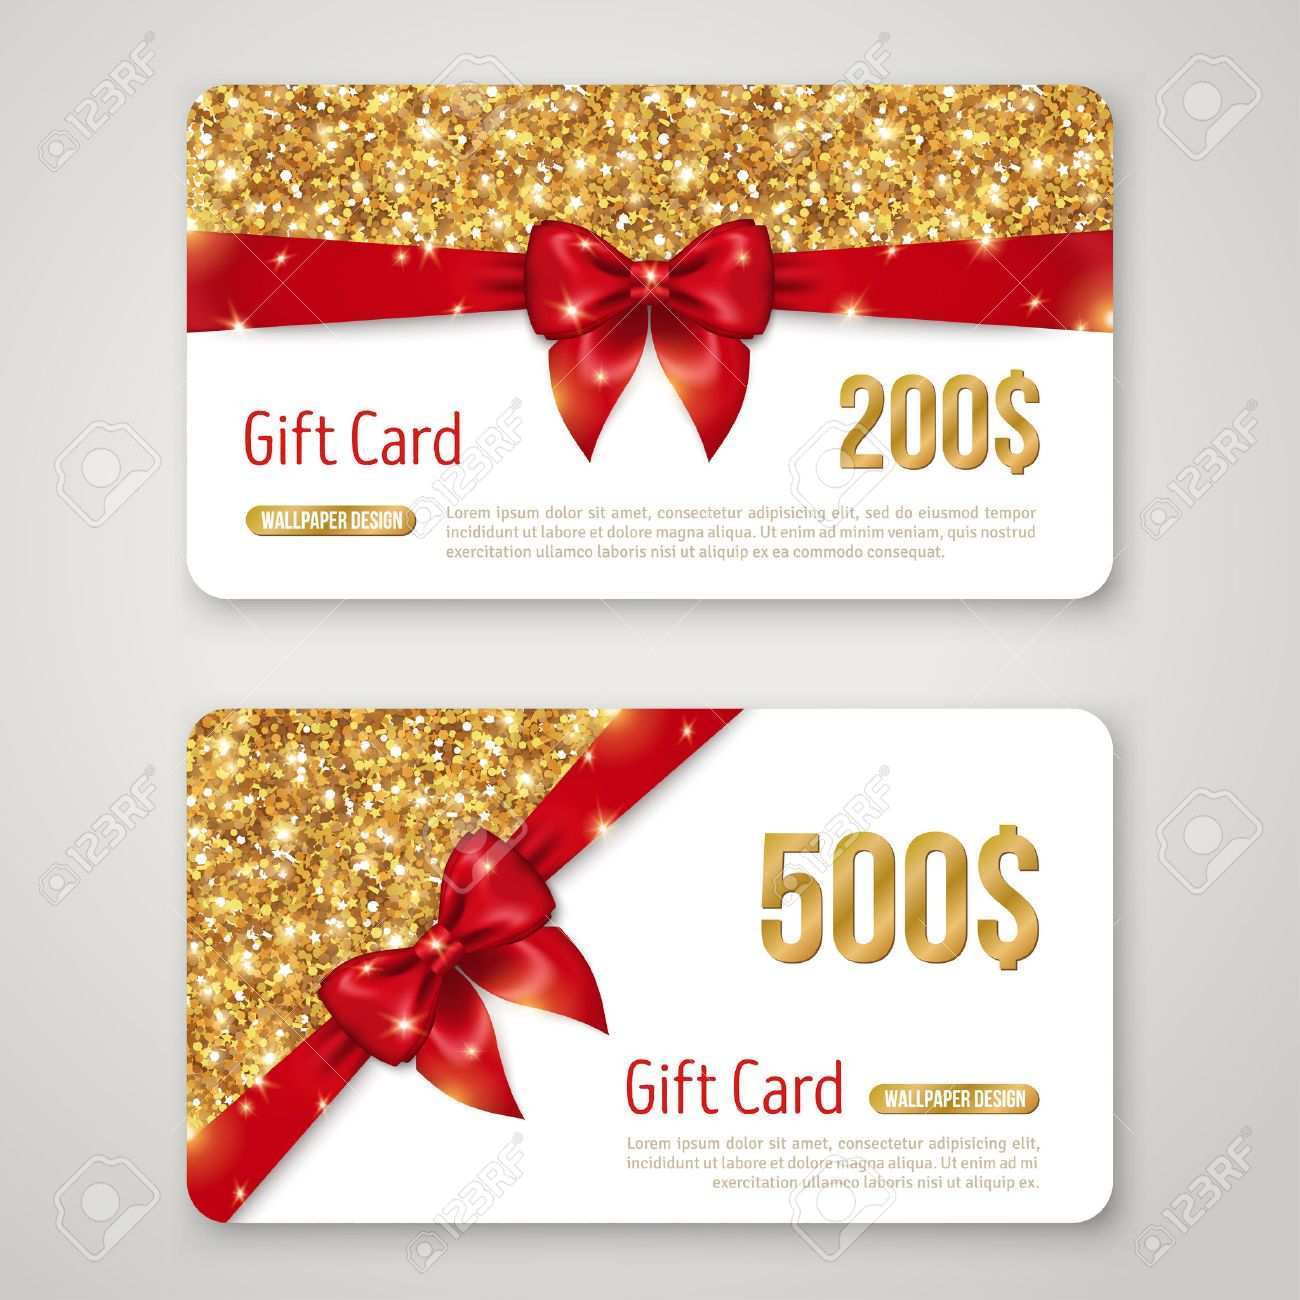 77 Creating Design A Gift Card Template With Stunning Design with Design A Gift Card Template